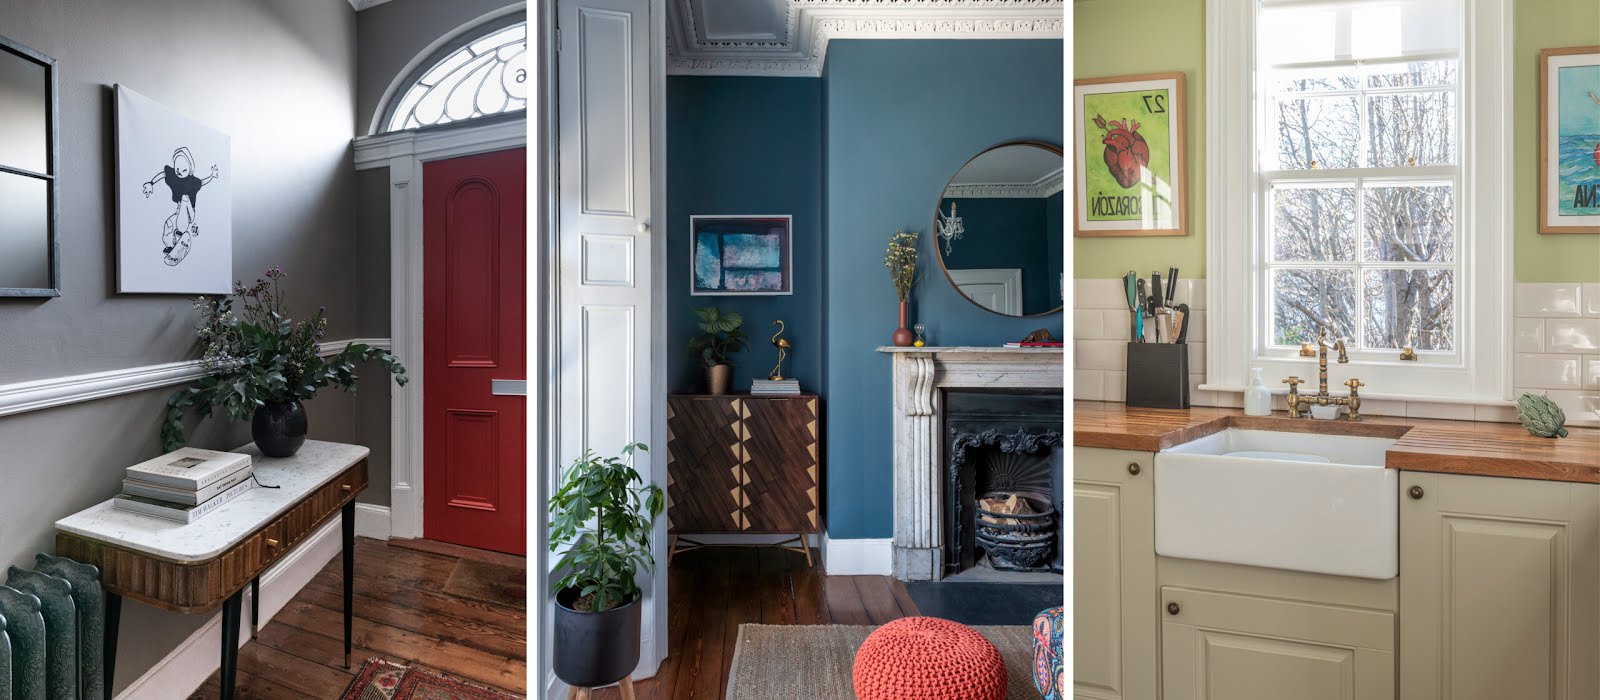 New life has been breathed into this Victorian Portobello home thanks to a revamp that’s full of personality